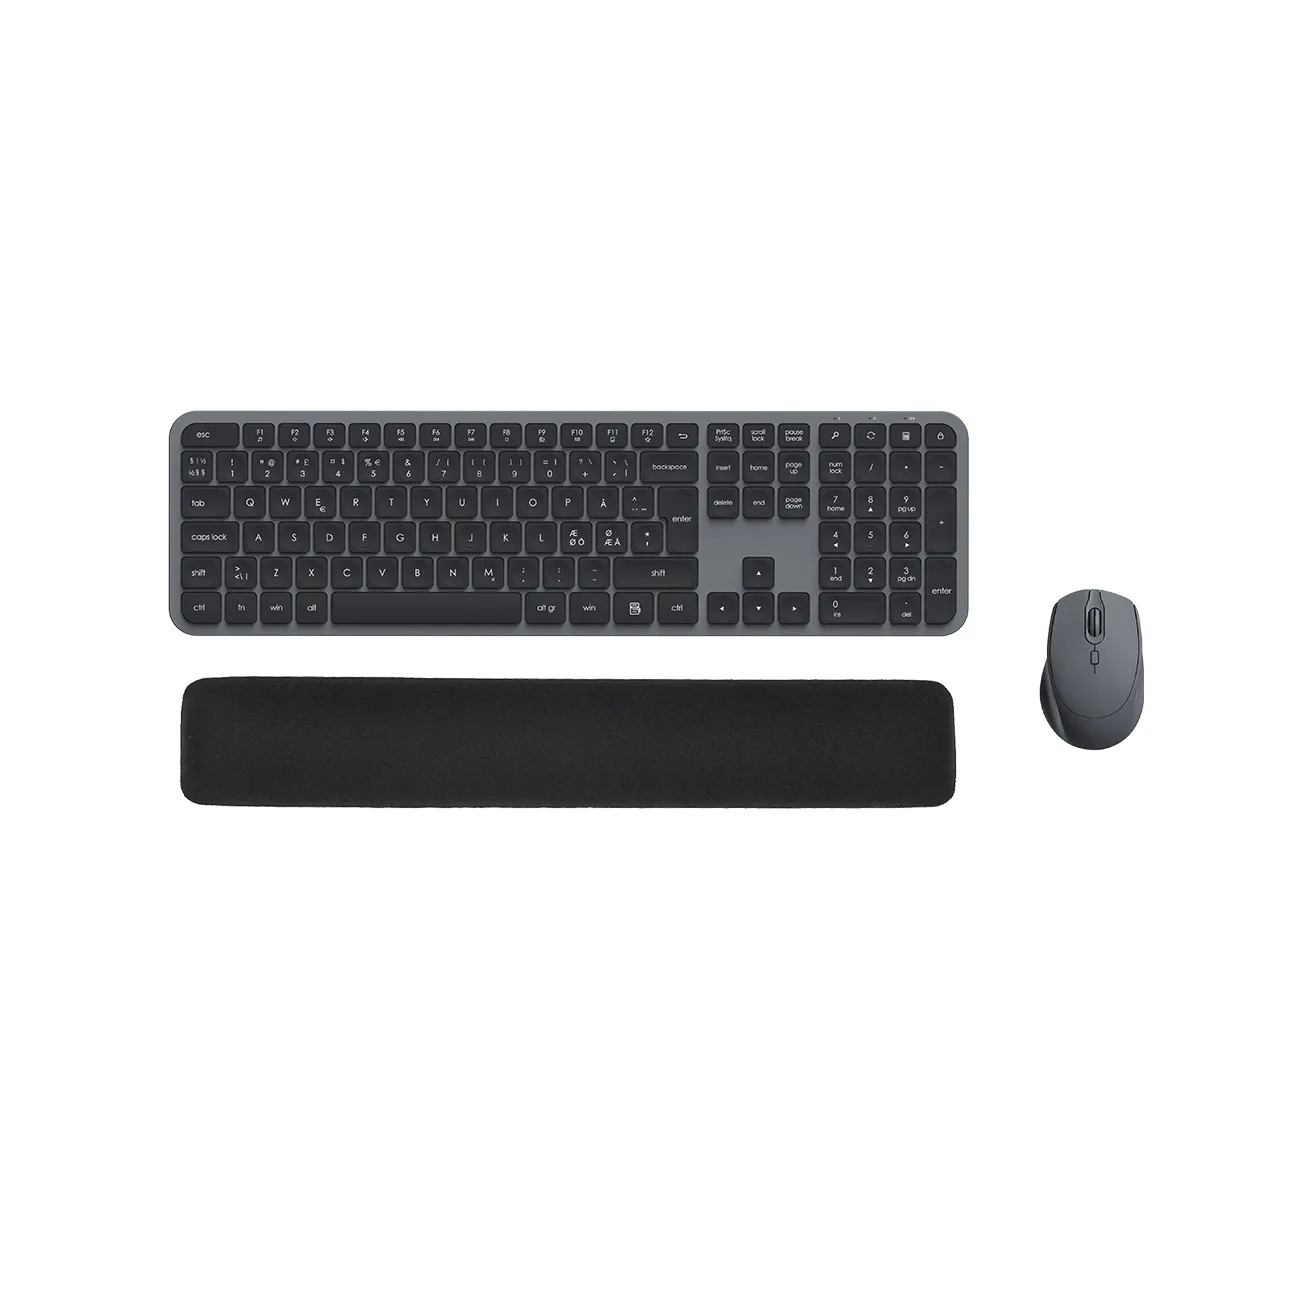 Wireless keyboard and mouse set 2.4GHZ keyboard and mouse set combo set three key zone dual mode wireless